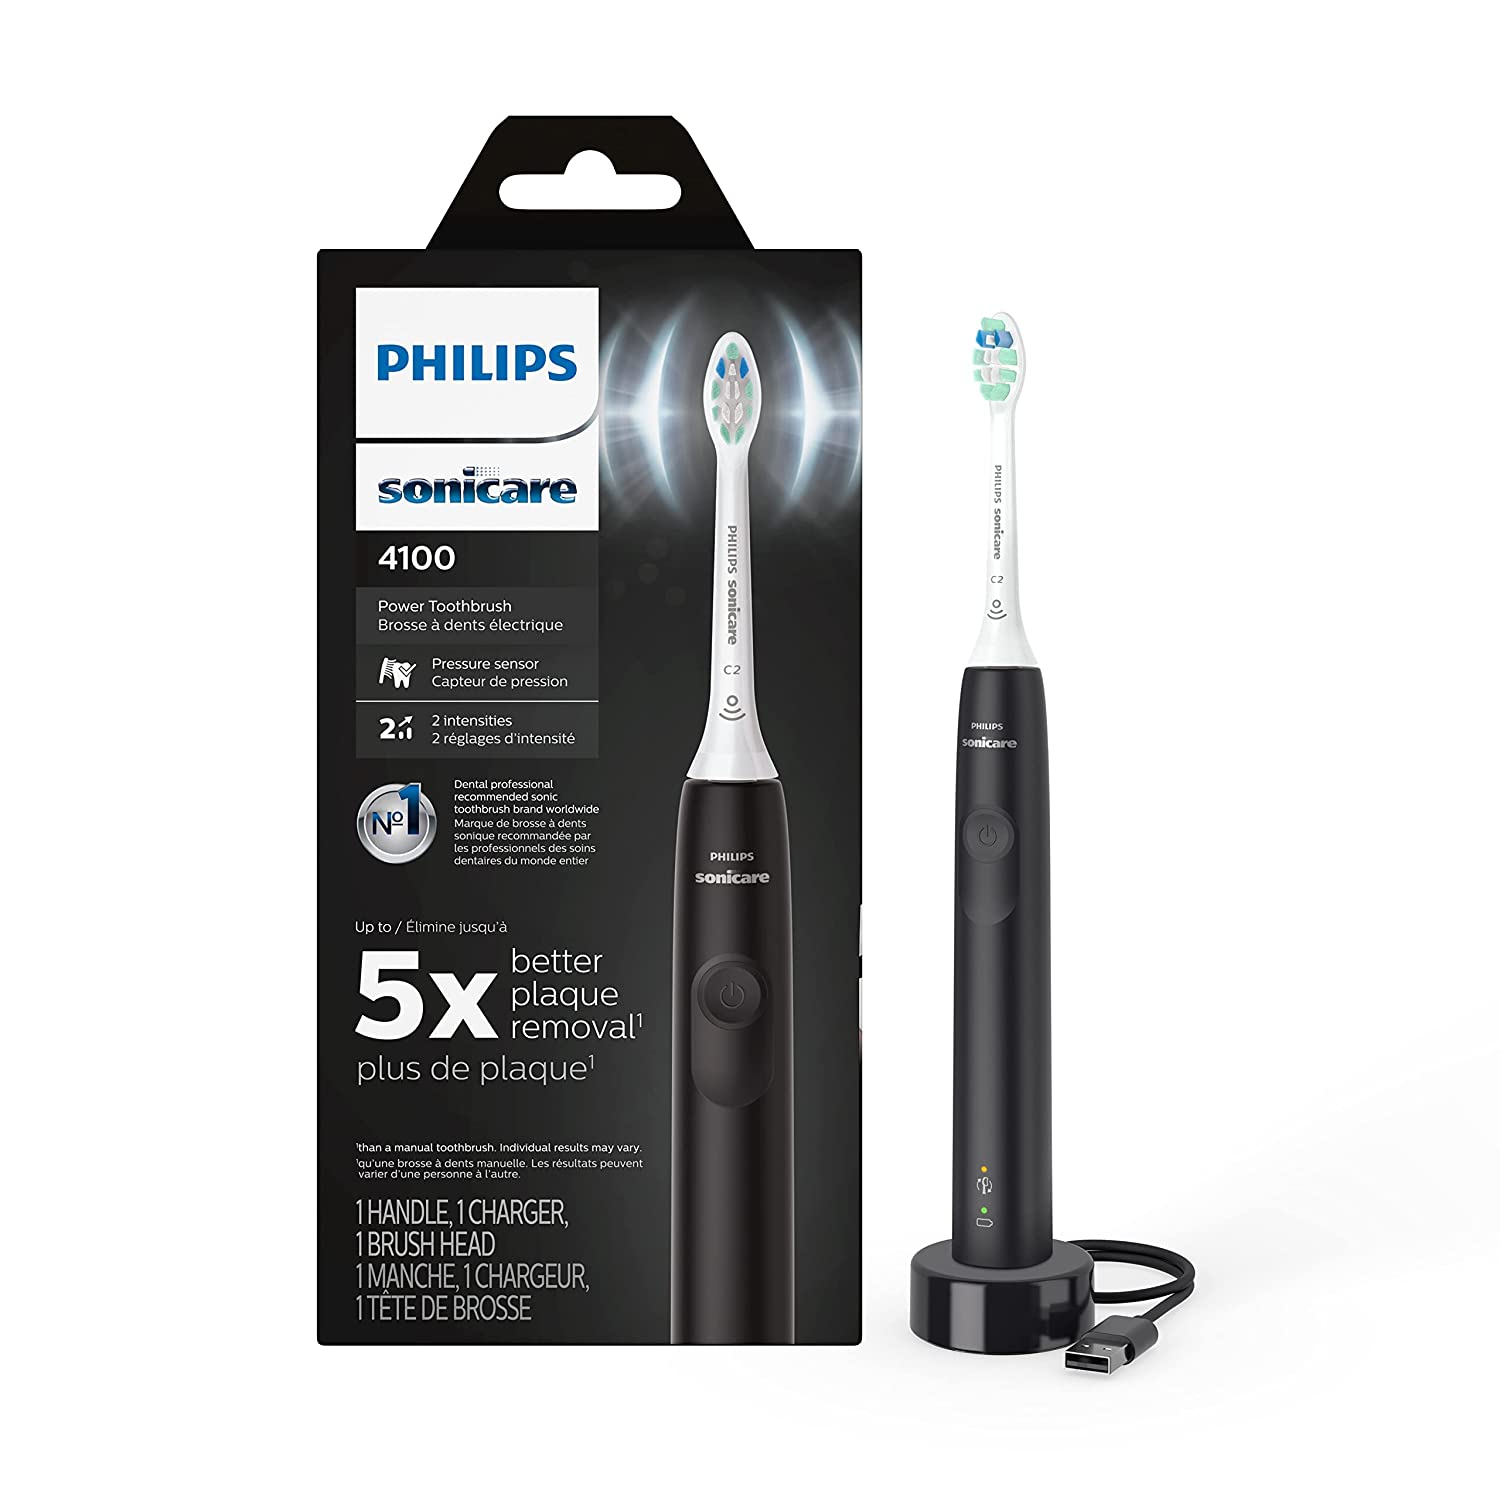 Review of Philips Sonicare 4100 Power Toothbrush, Rechargeable Electric Toothbrush - HX3681/24